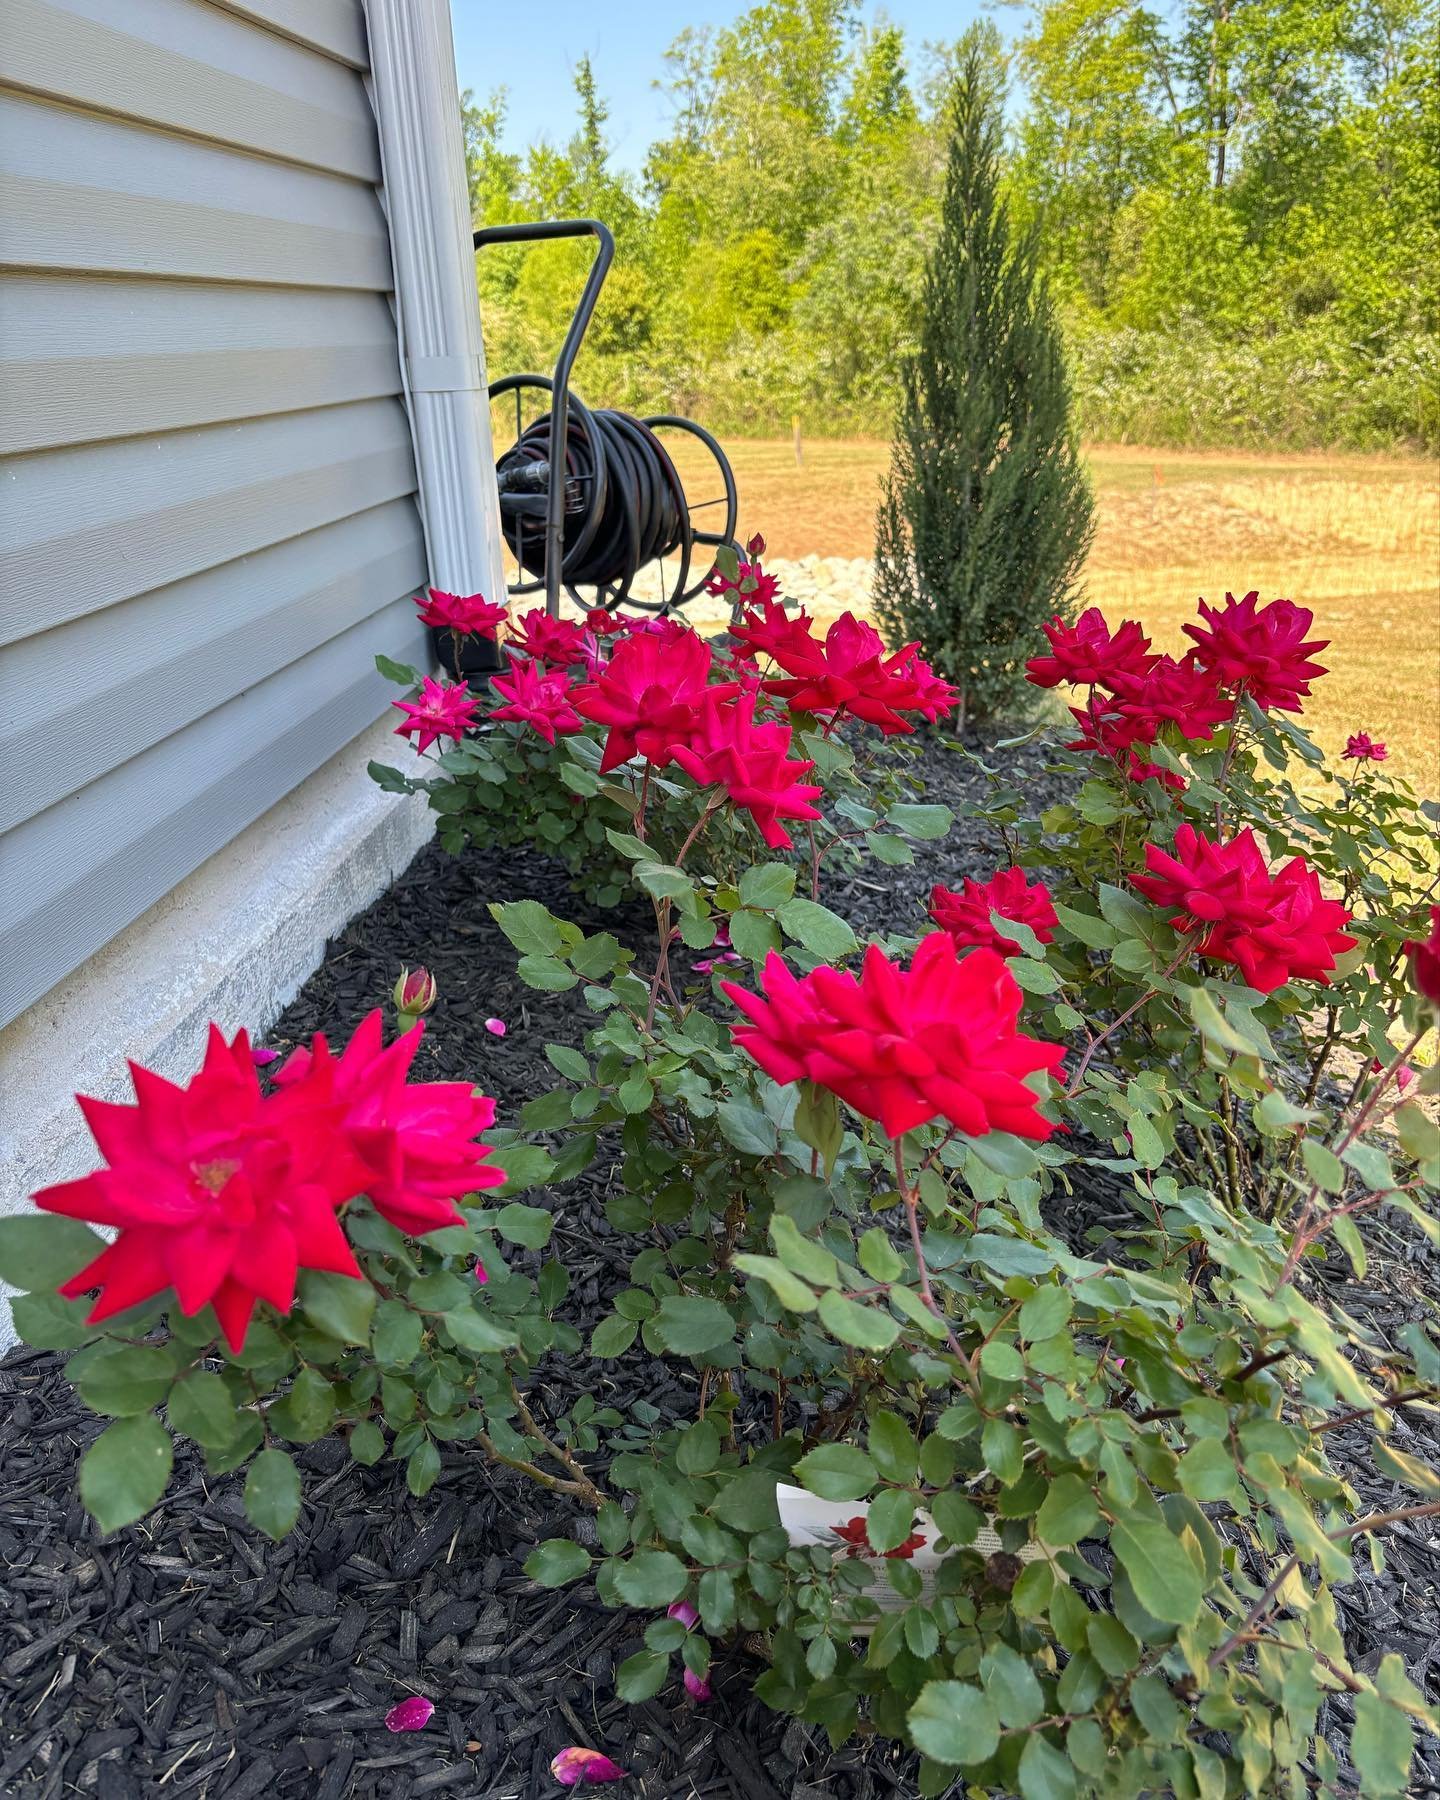 A peony we planted back in February, is now in full bloom🌸💐

Contact us today to plan your landscape with perennials like these!
☎️ (910) 890-9080
💻 higginslandscape.com

#landscape #nclandscapers #peony #perennial